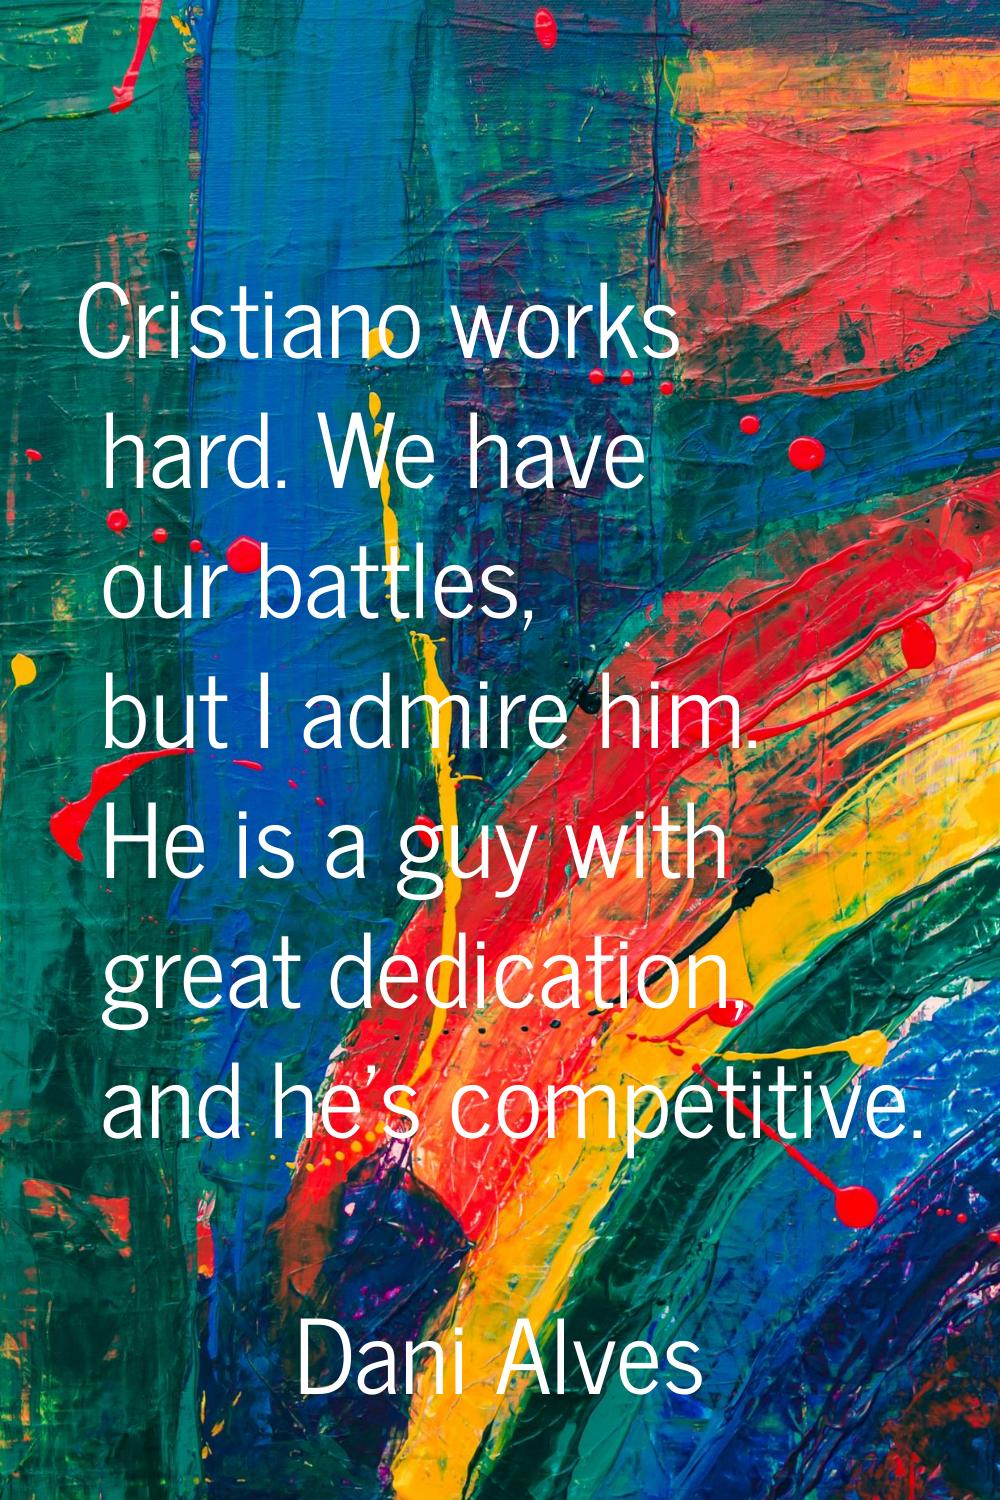 Cristiano works hard. We have our battles, but I admire him. He is a guy with great dedication, and